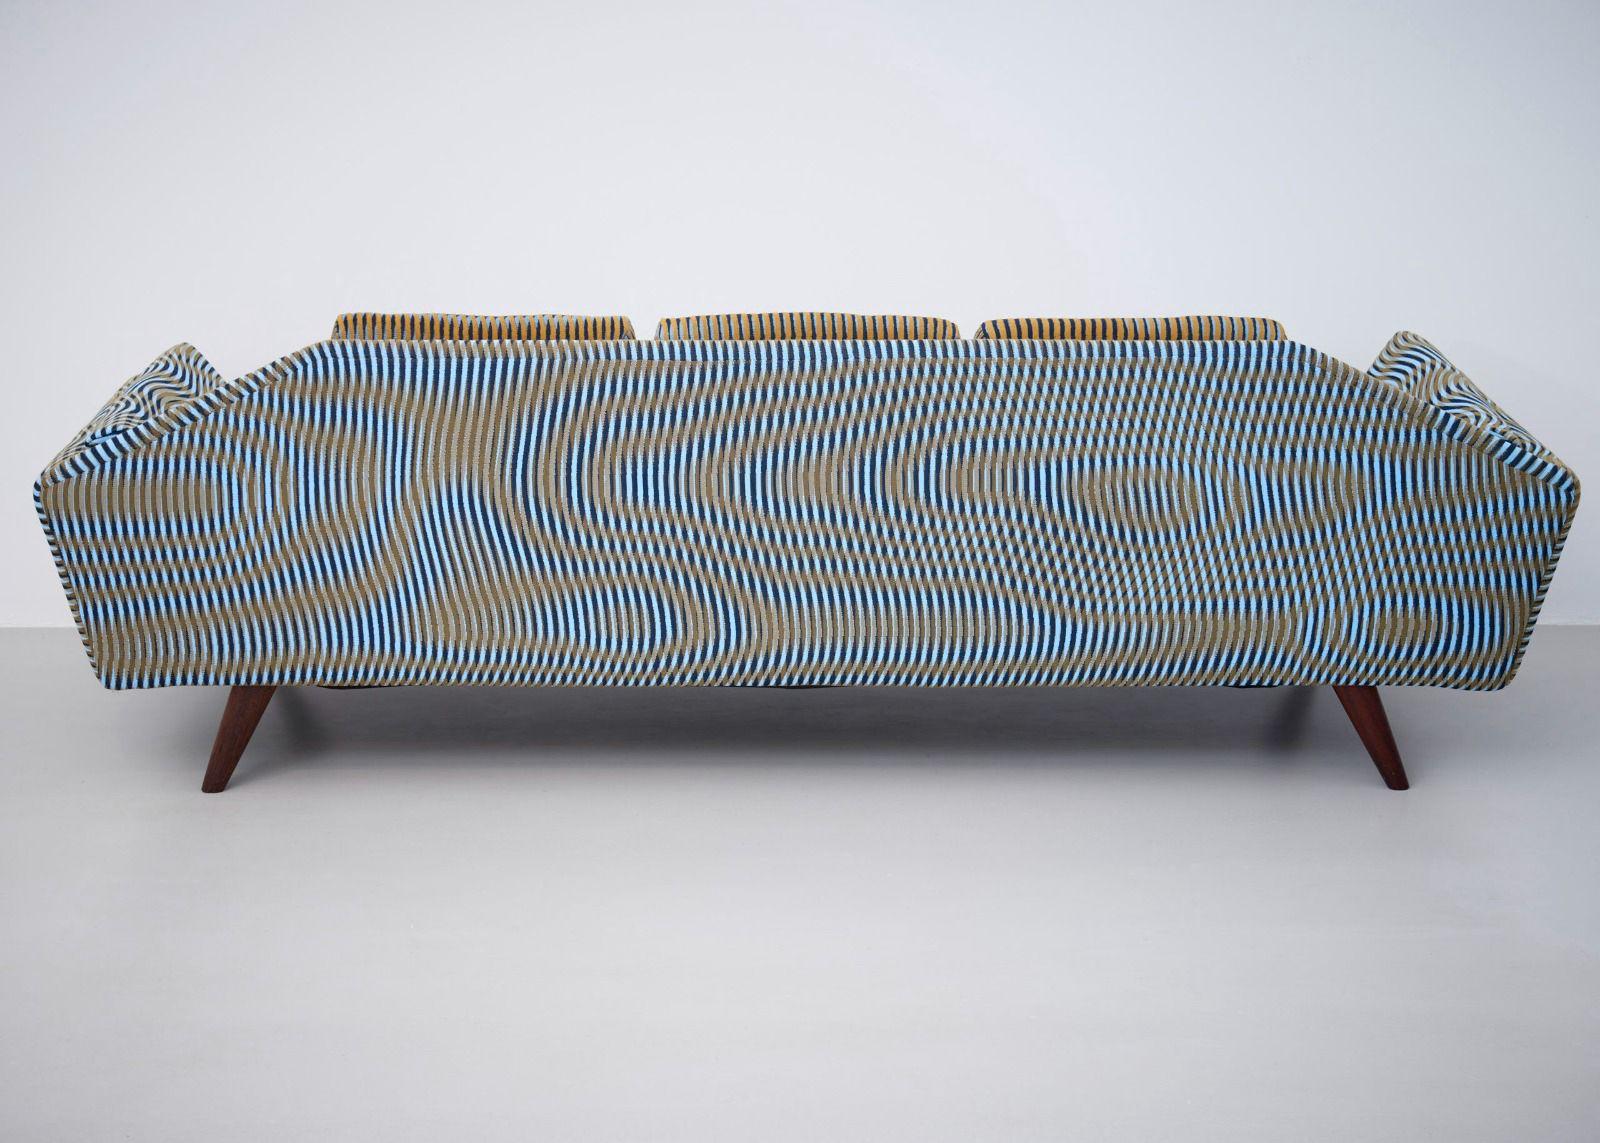 American Newly upholstered Adrian Pearsall Gondola Sofa in custom fabric by Case Studies